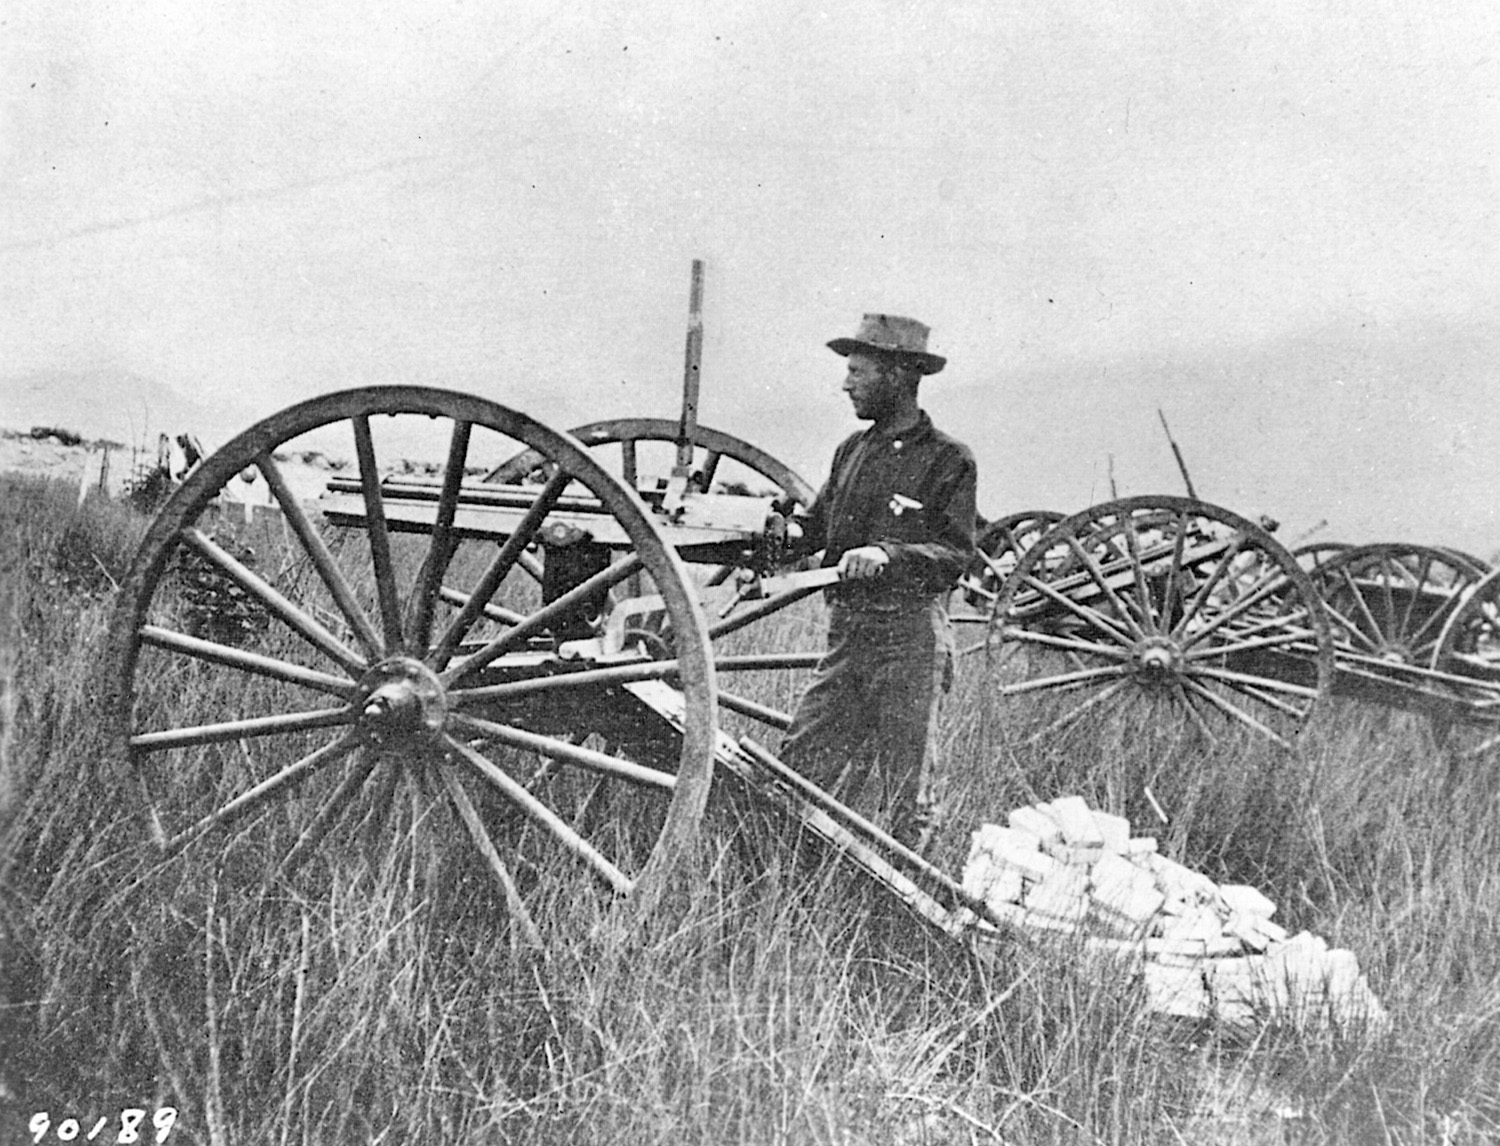 A Gatling gun set up outside Santiago, Cuba, during the Spanish-American War of 1898.  By this time Gatlings were integrated into larger army maneuvers and actions.